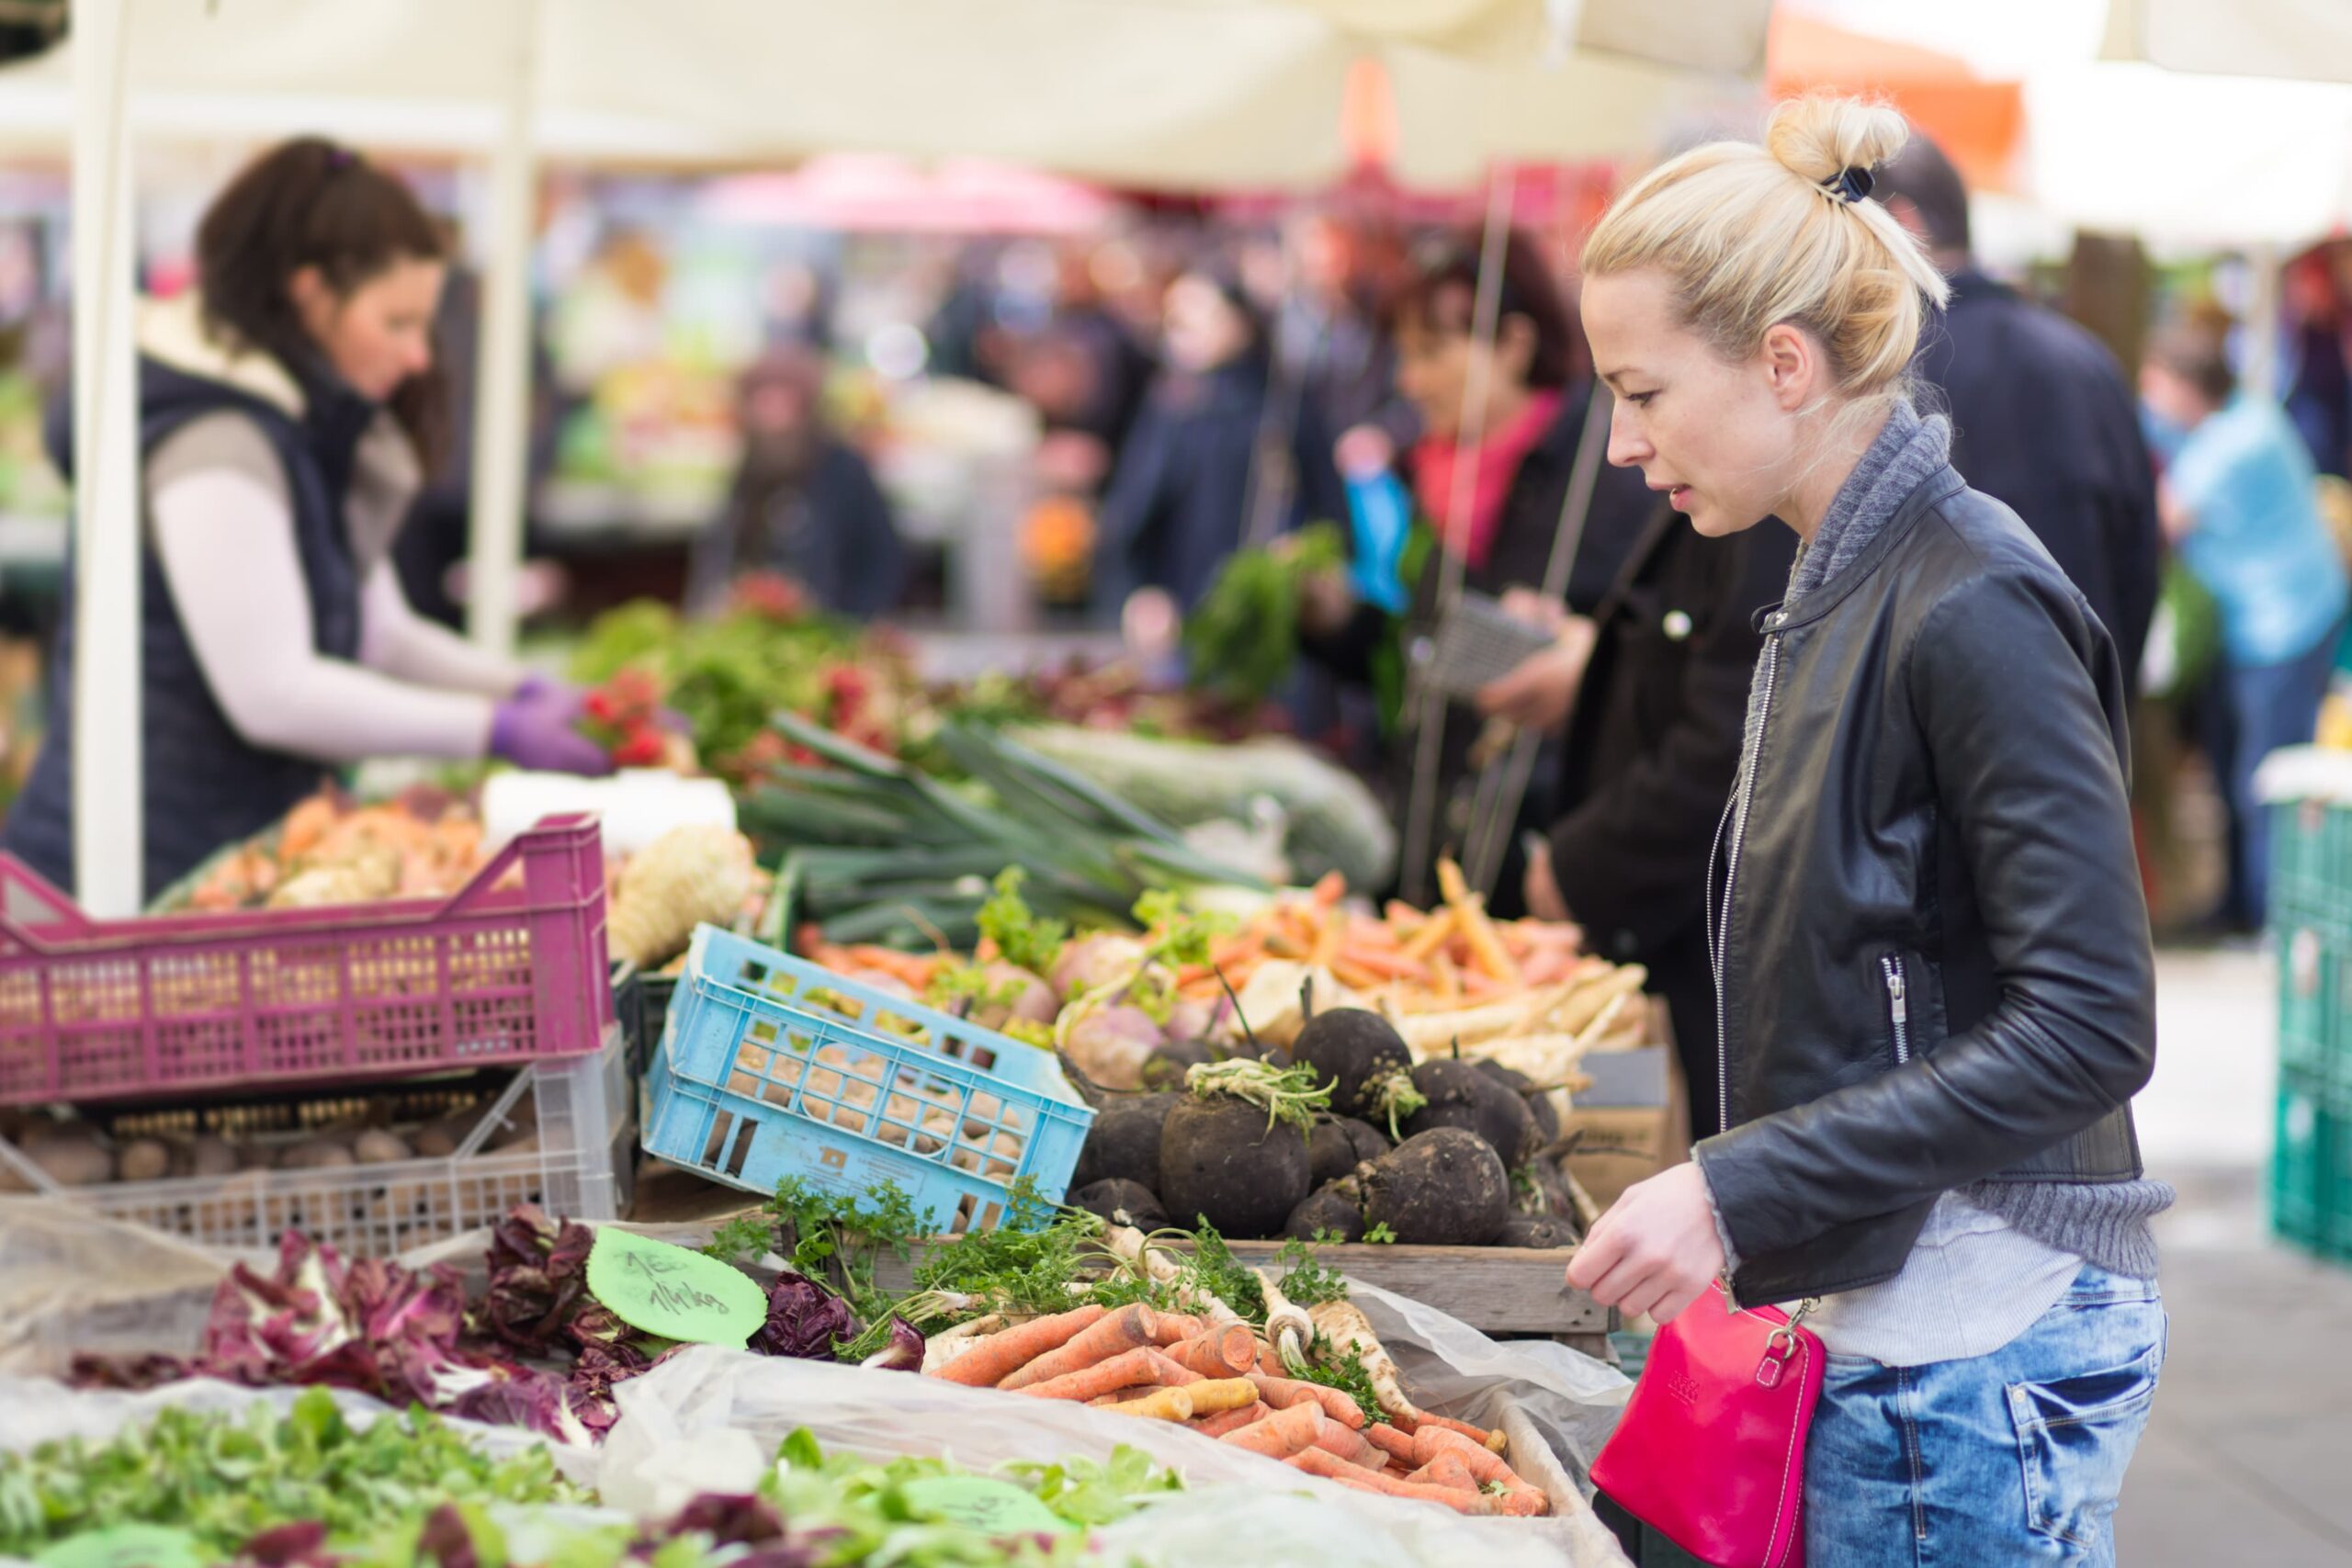 Woman looks at vegetables on market stall